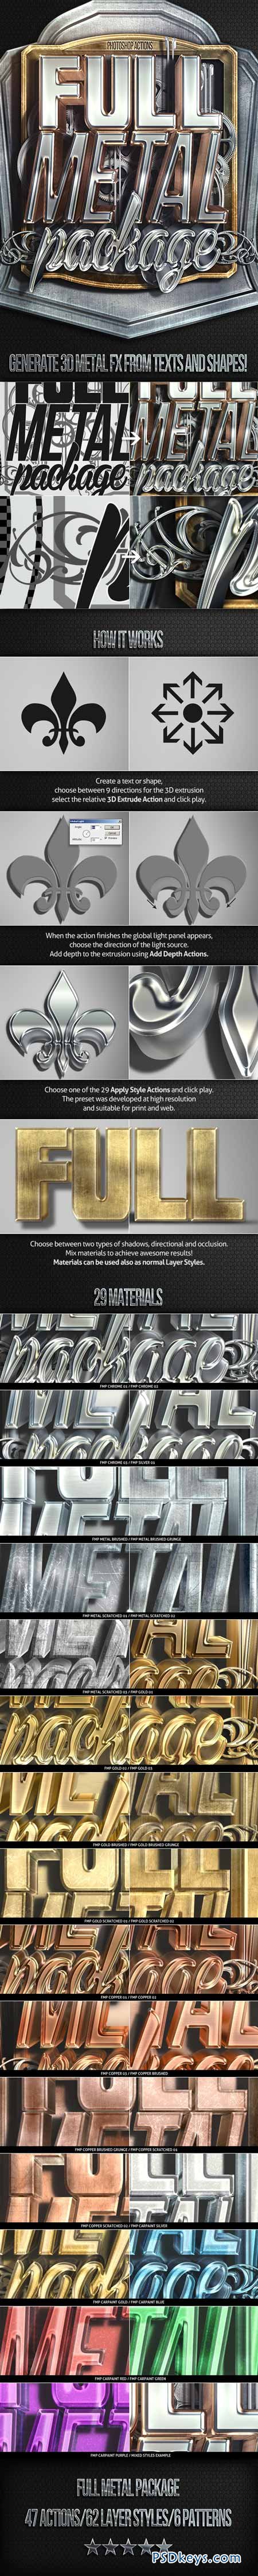 Full Metal Package 3D - Photoshop Actions 7947591